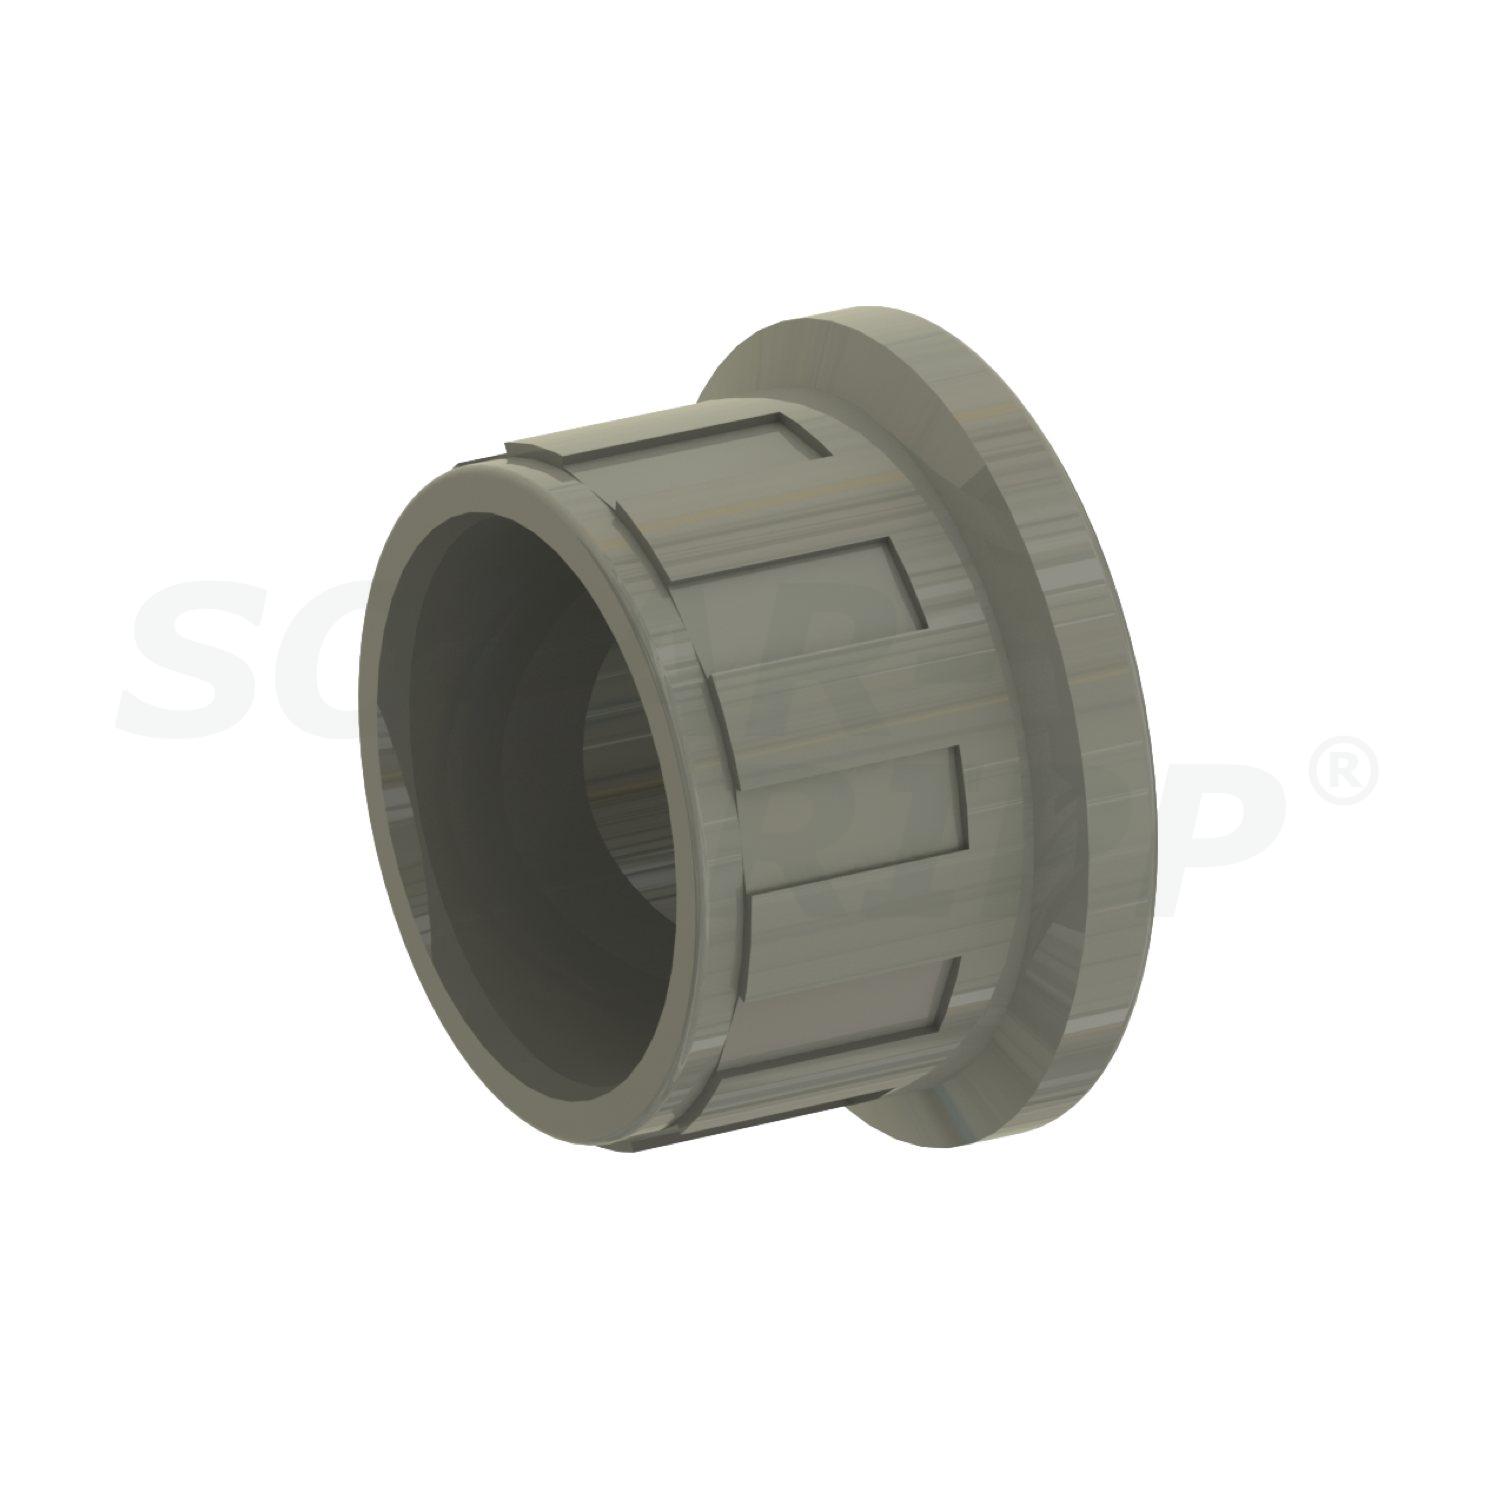 PVC insert for actuated valve 50mm